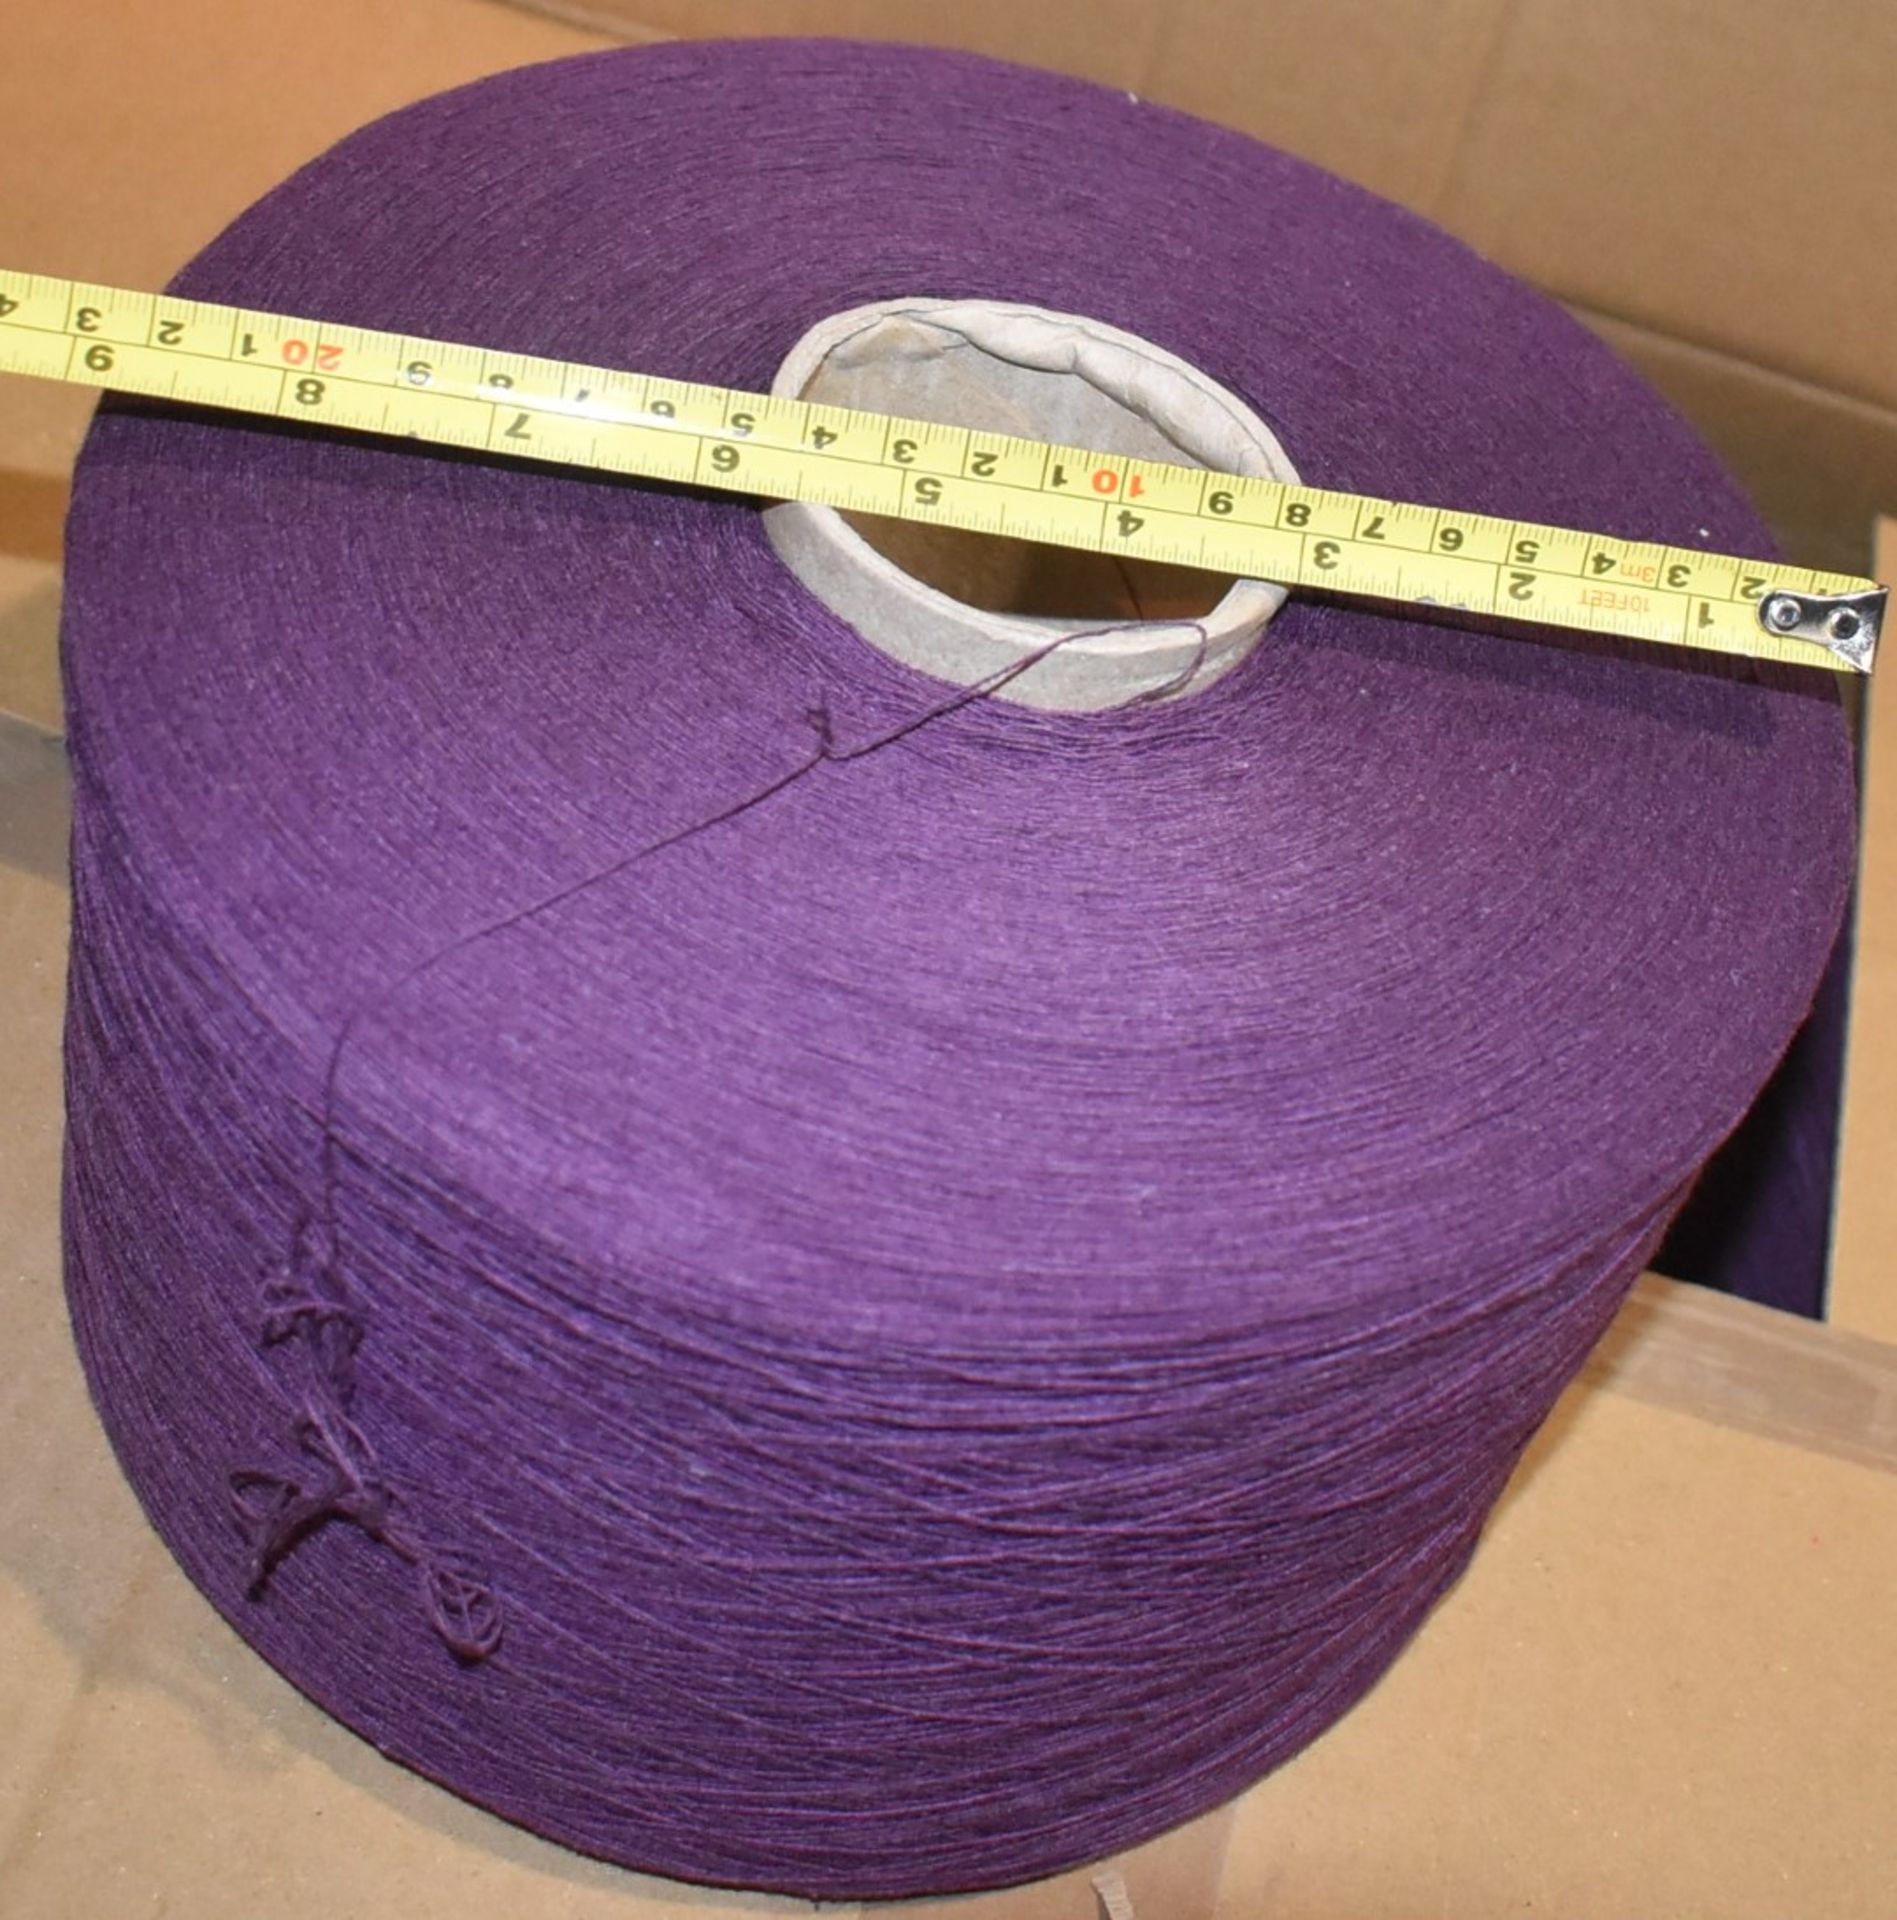 1 x Cone of 1/13 MicroCotton Knitting Yarn - Purple - Approx Weight: 2,300g - New Stock ABL Yarn - Image 7 of 9